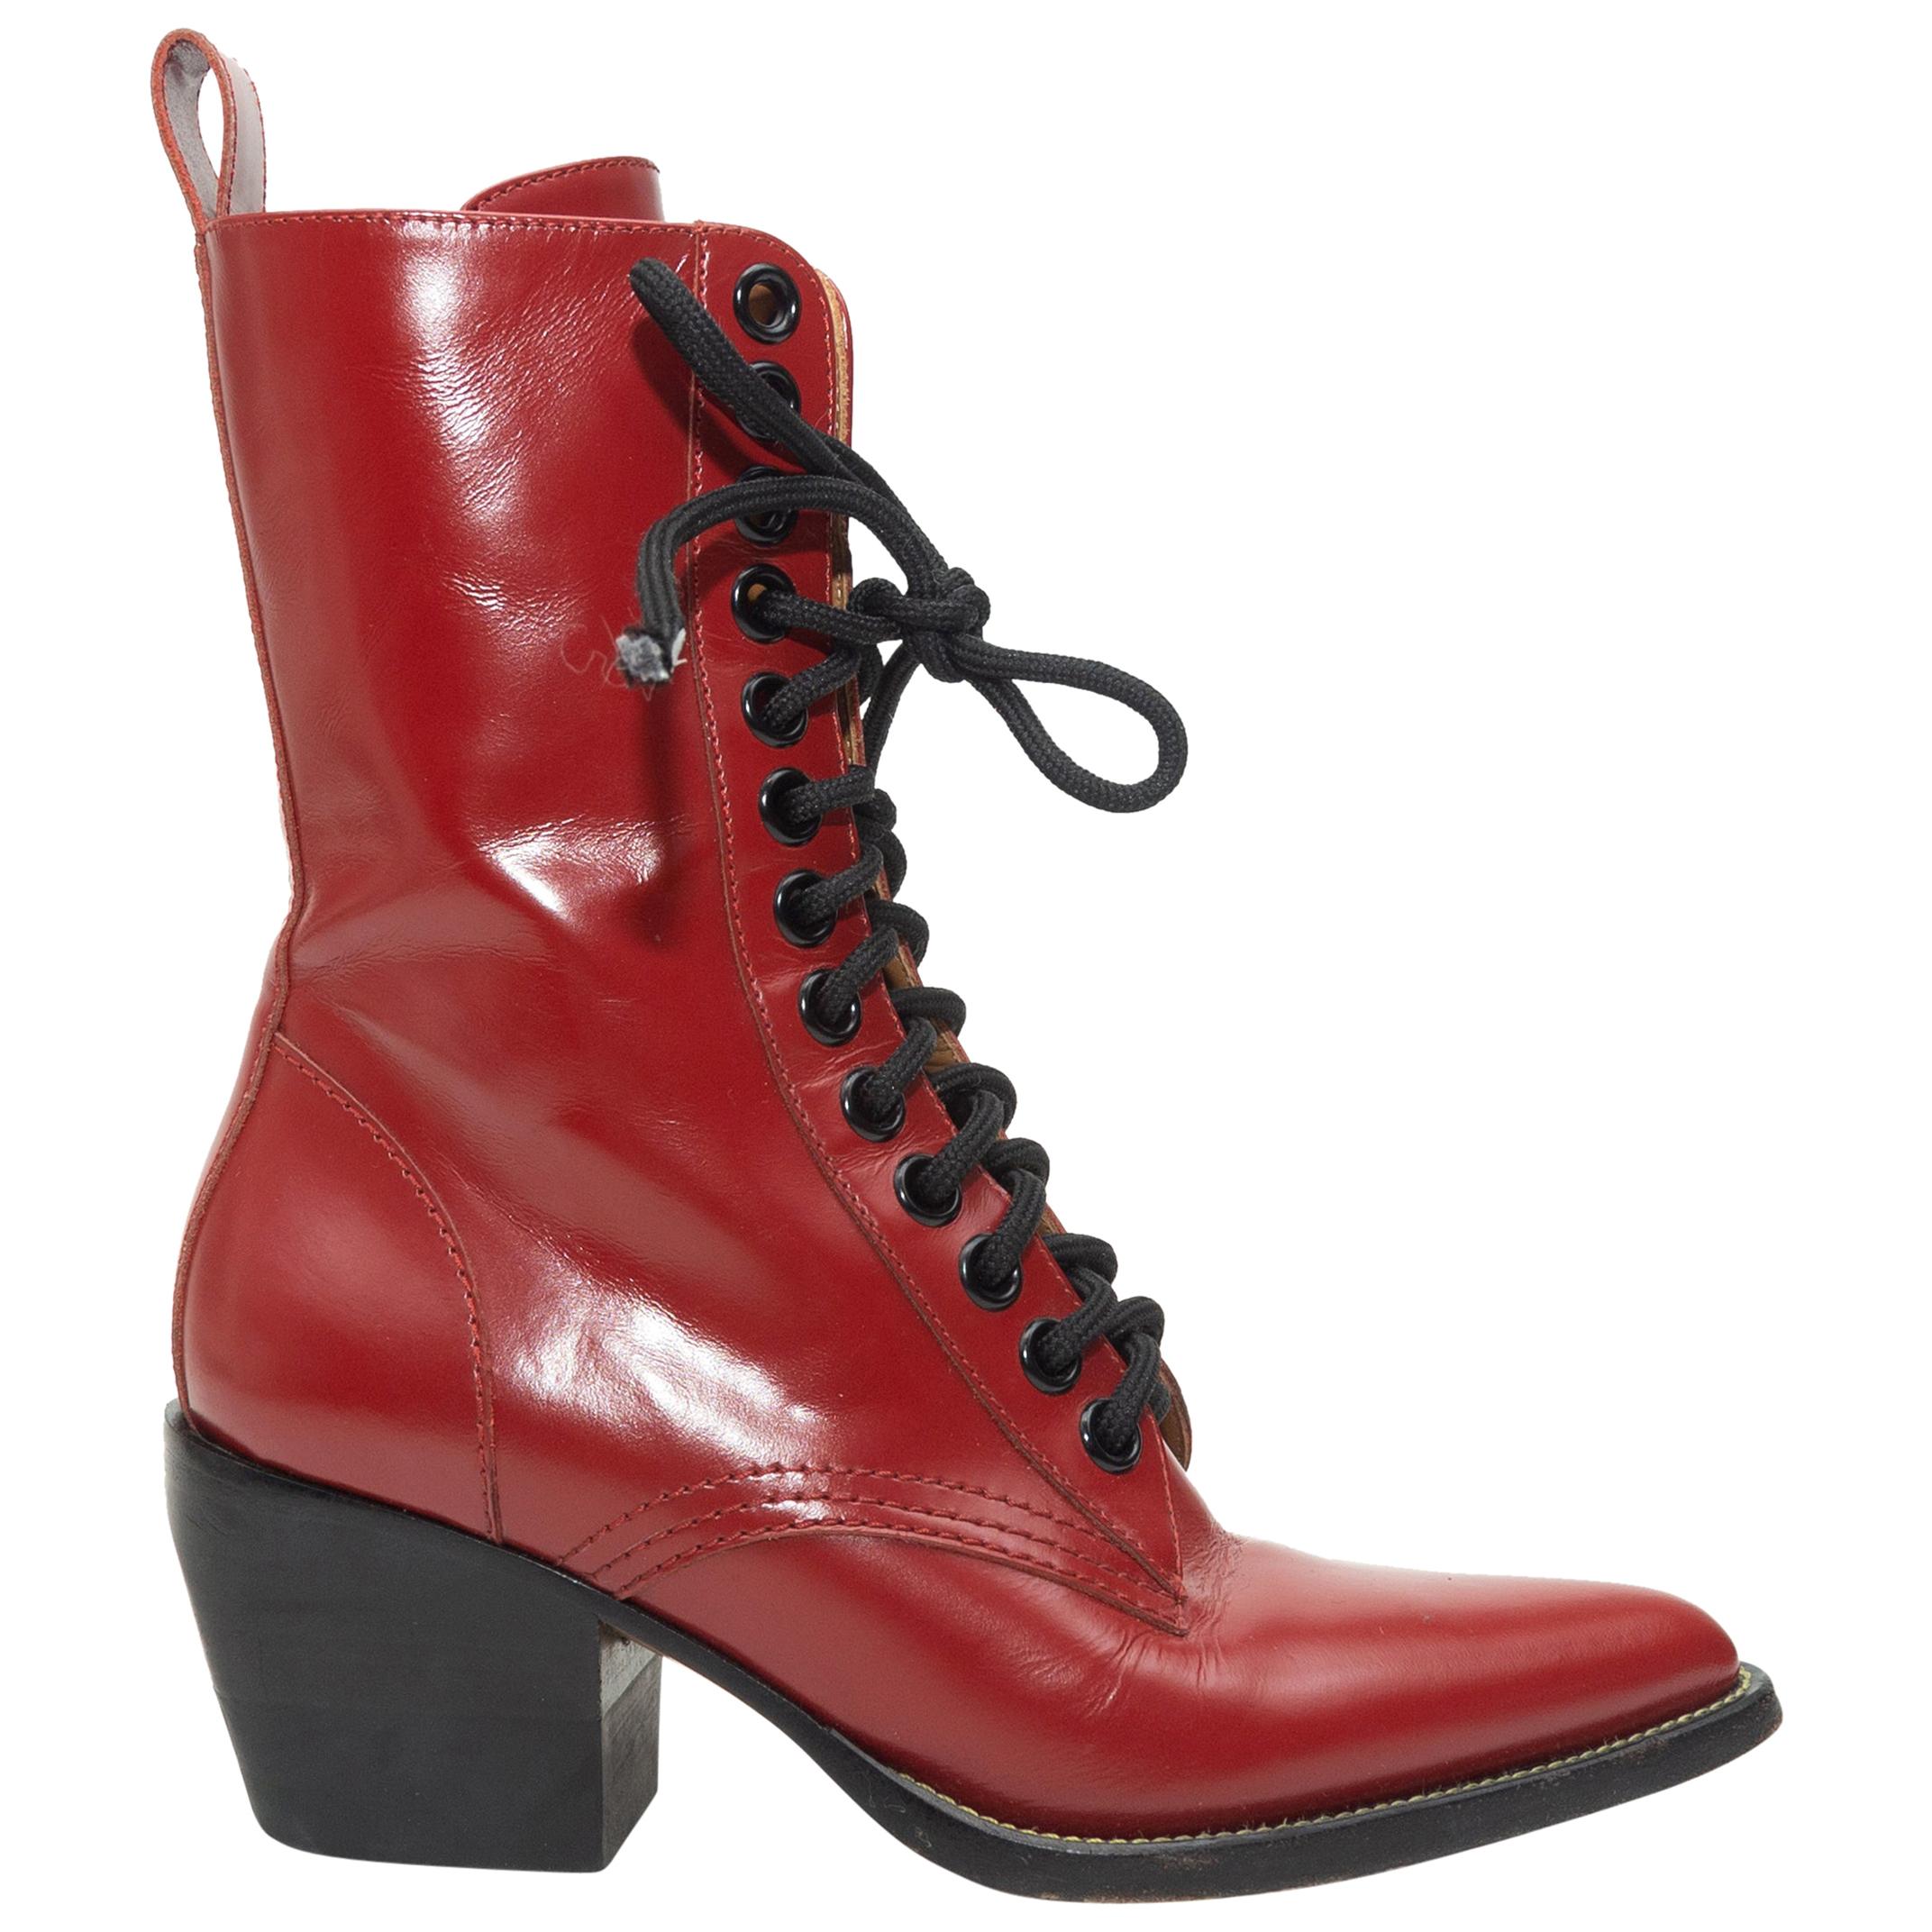 Chloe Red Rylee Pointed-Toe Lace-Up Boots